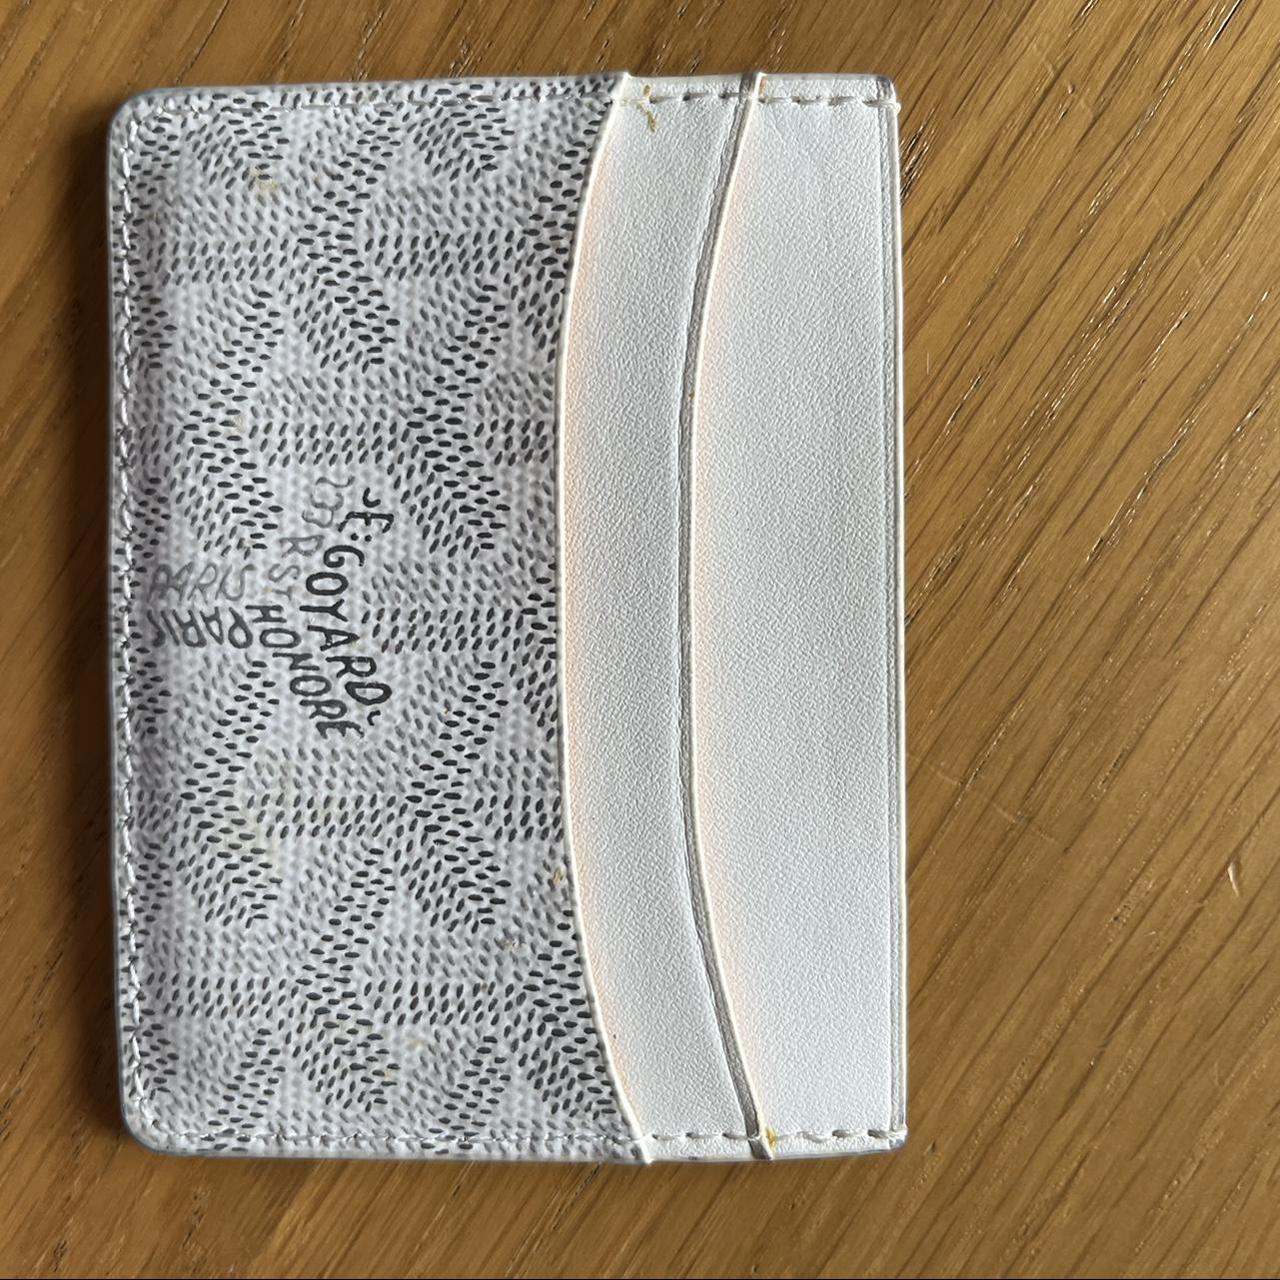 Used goyard cardholder White No box OPEN TO OFFERS - Depop